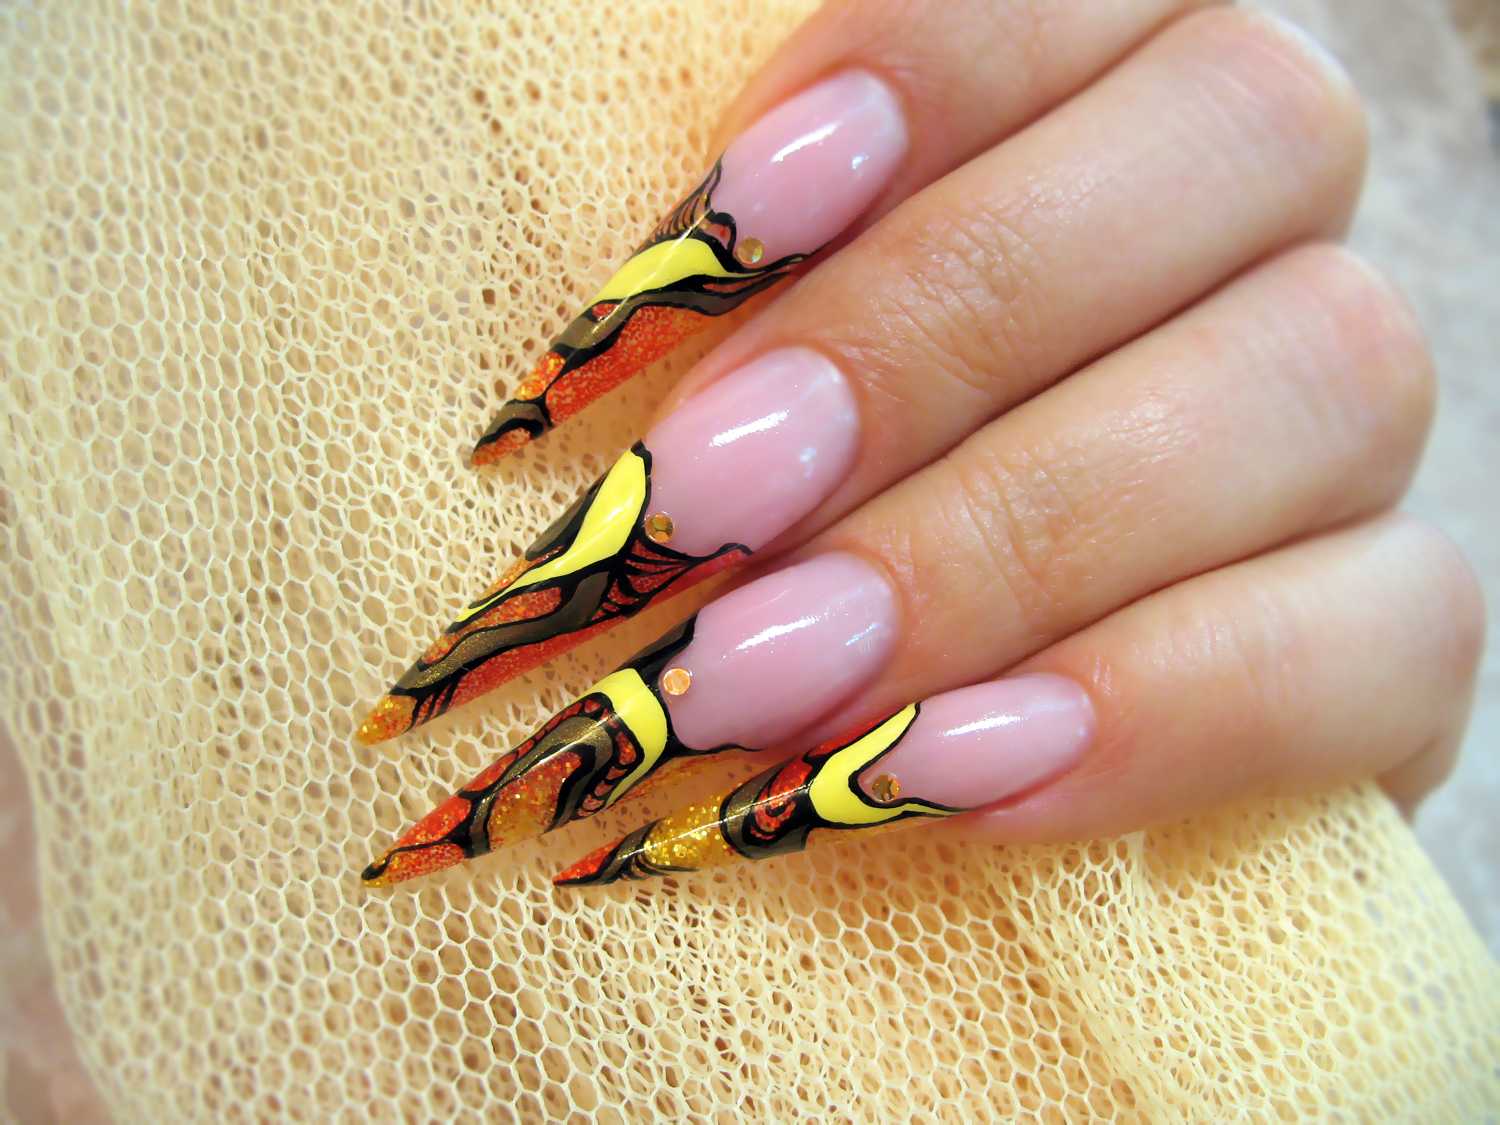 1. Hand Painted Nail Art Designs - wide 9